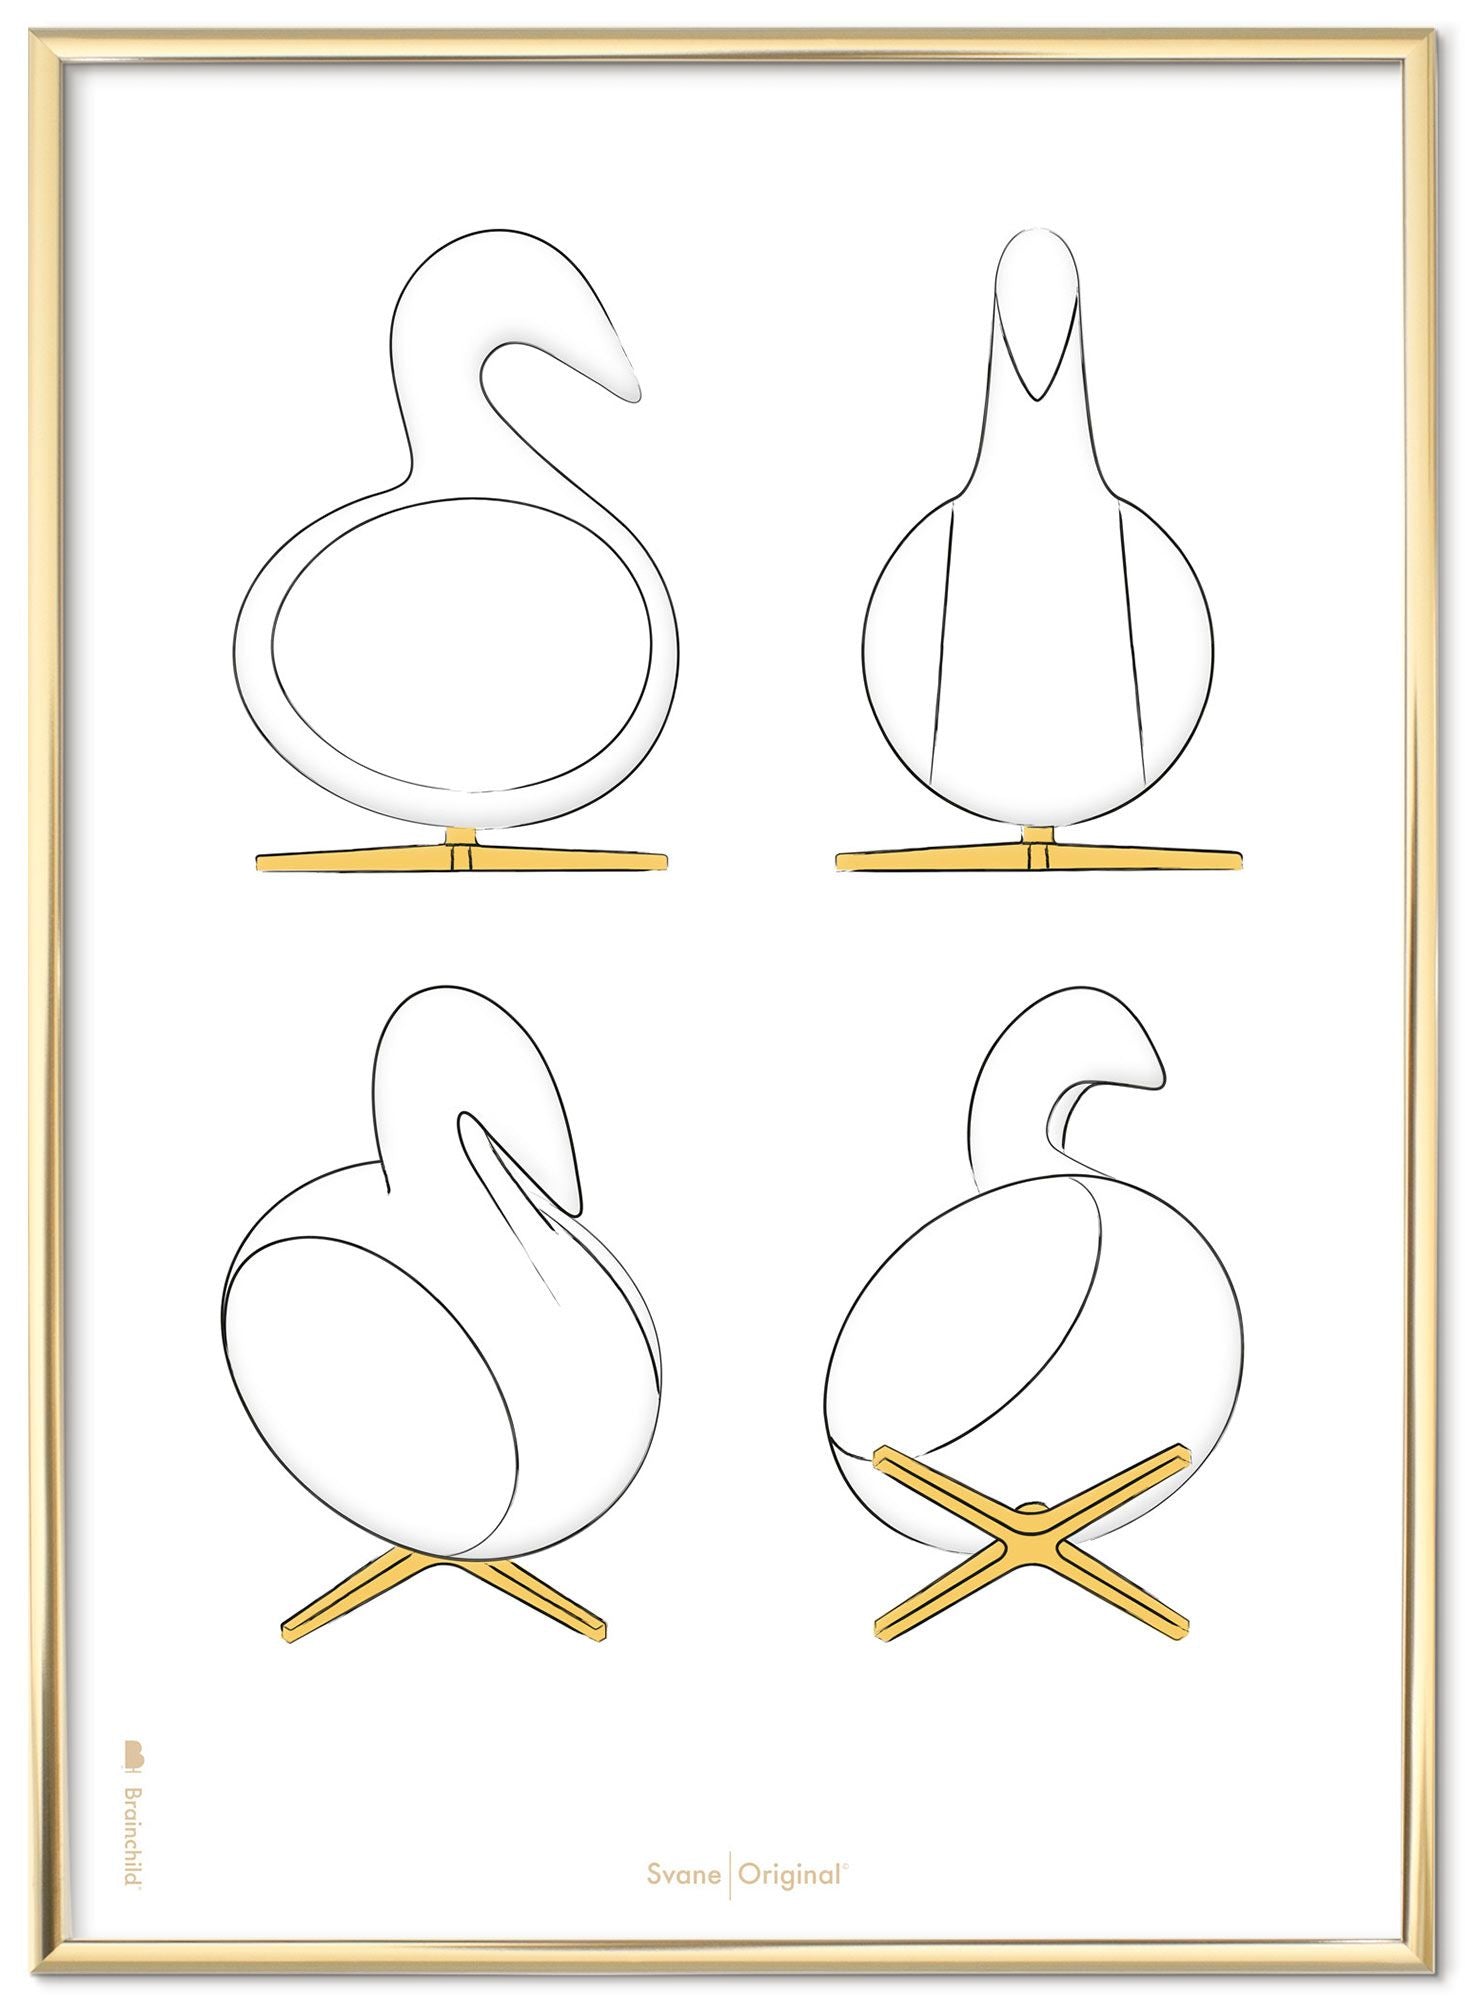 Brainchild Swan Design Sketches Poster Frame Made Of Brass Colored Metal 30x40 Cm, White Background